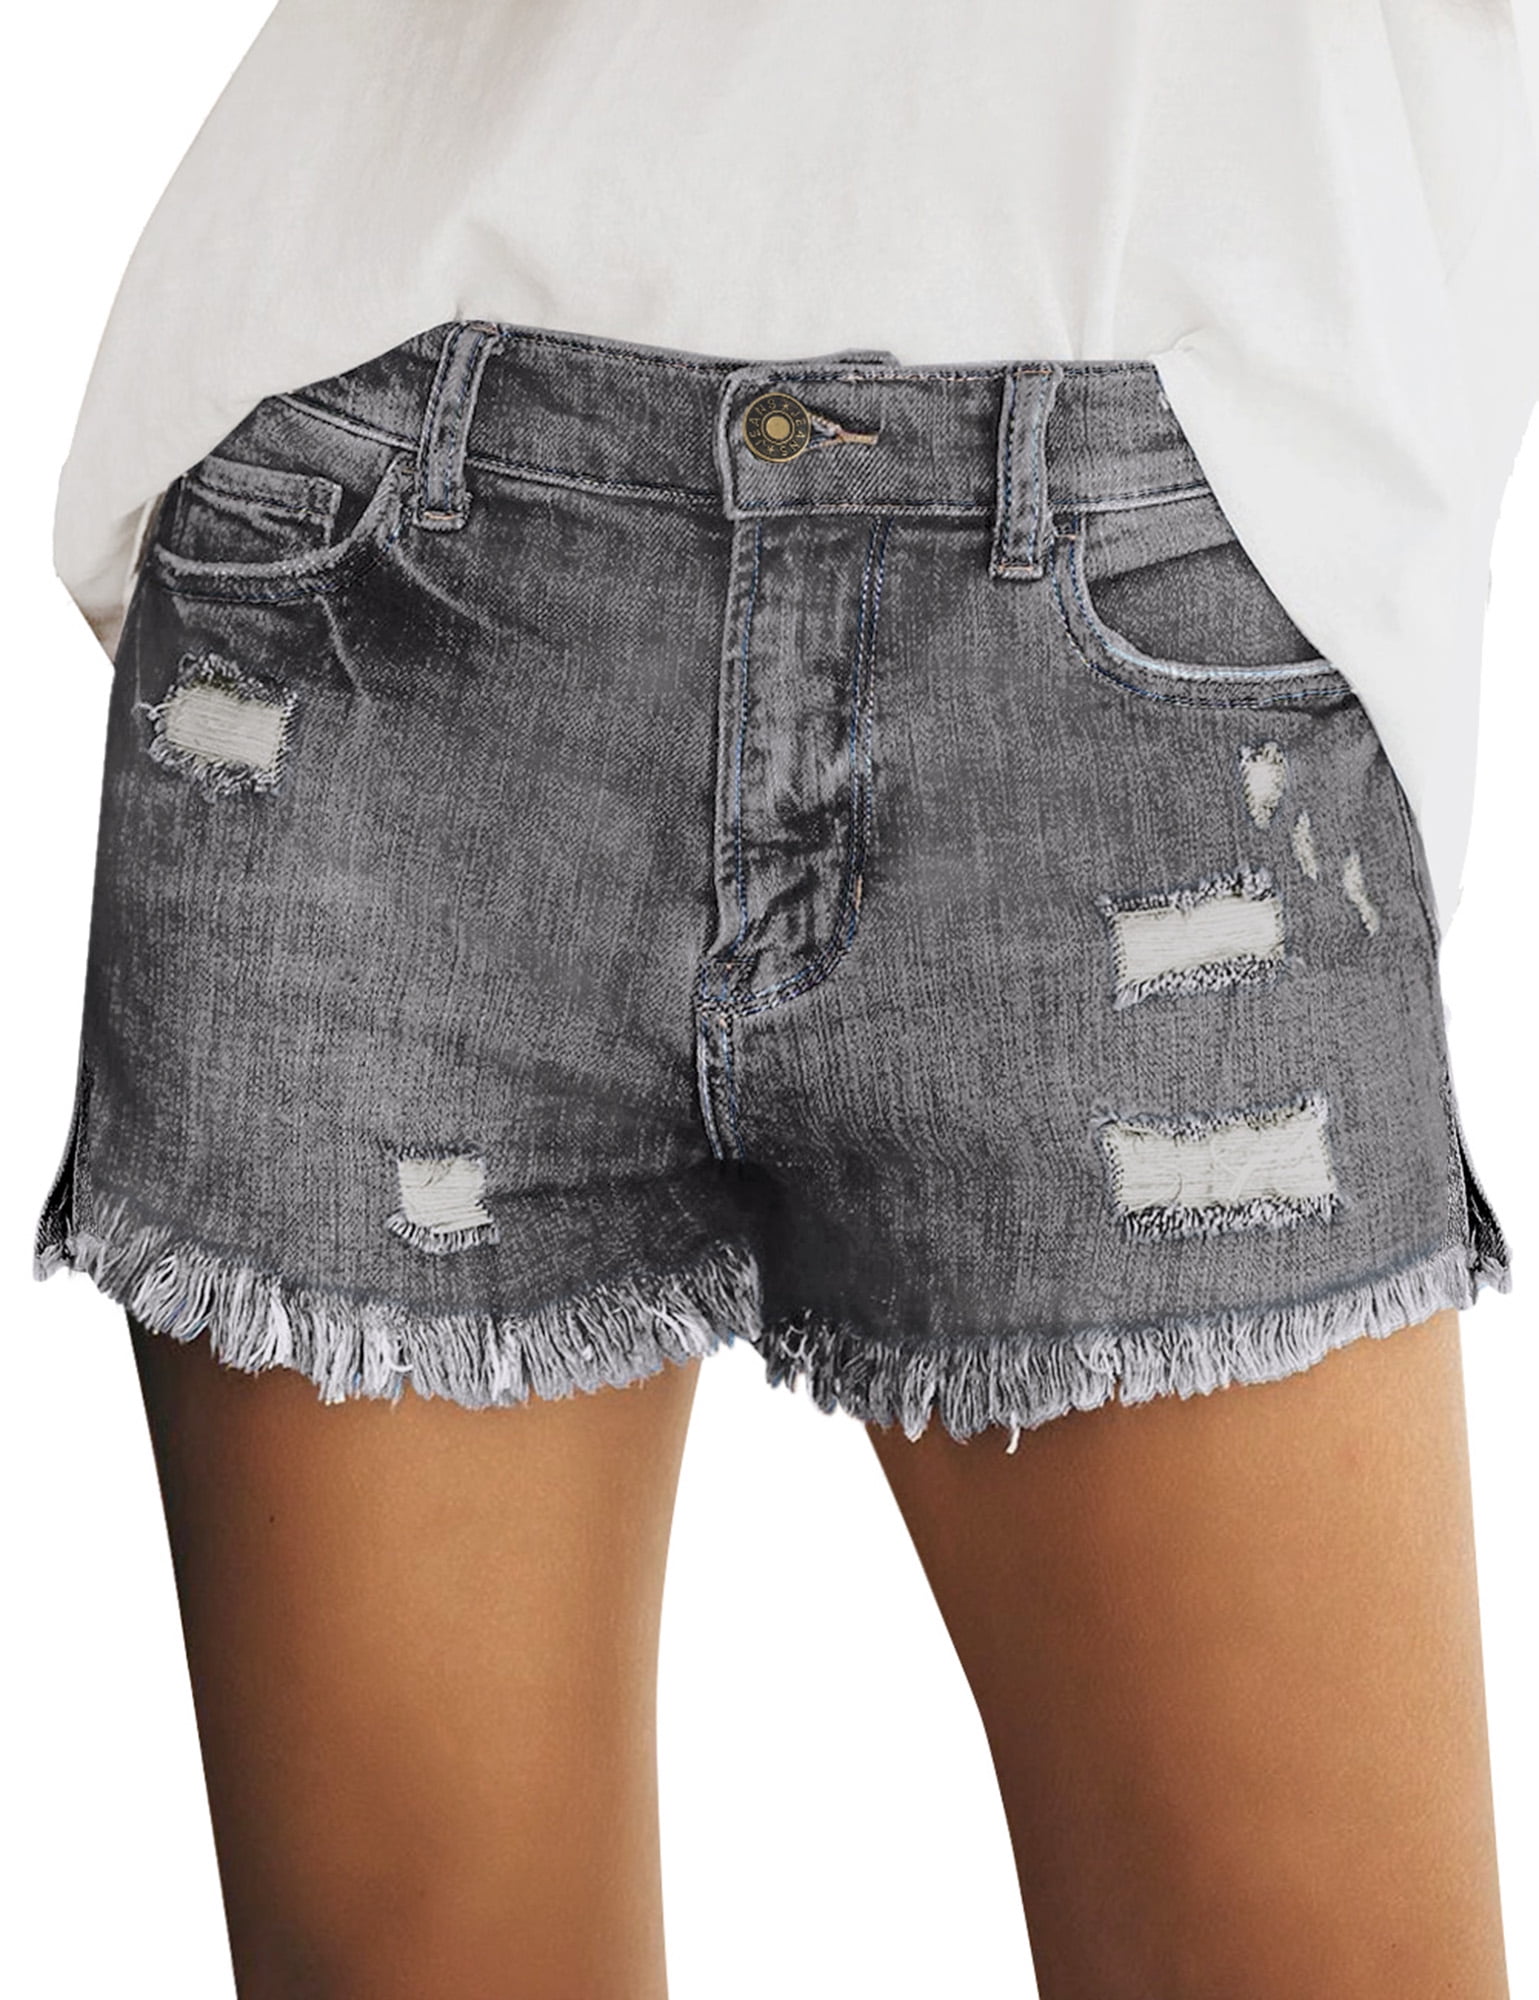 shelikes Womens Shorts High Waisted Summer Denim Shorts Casual Hot Pants Jeans Short with Pockets 